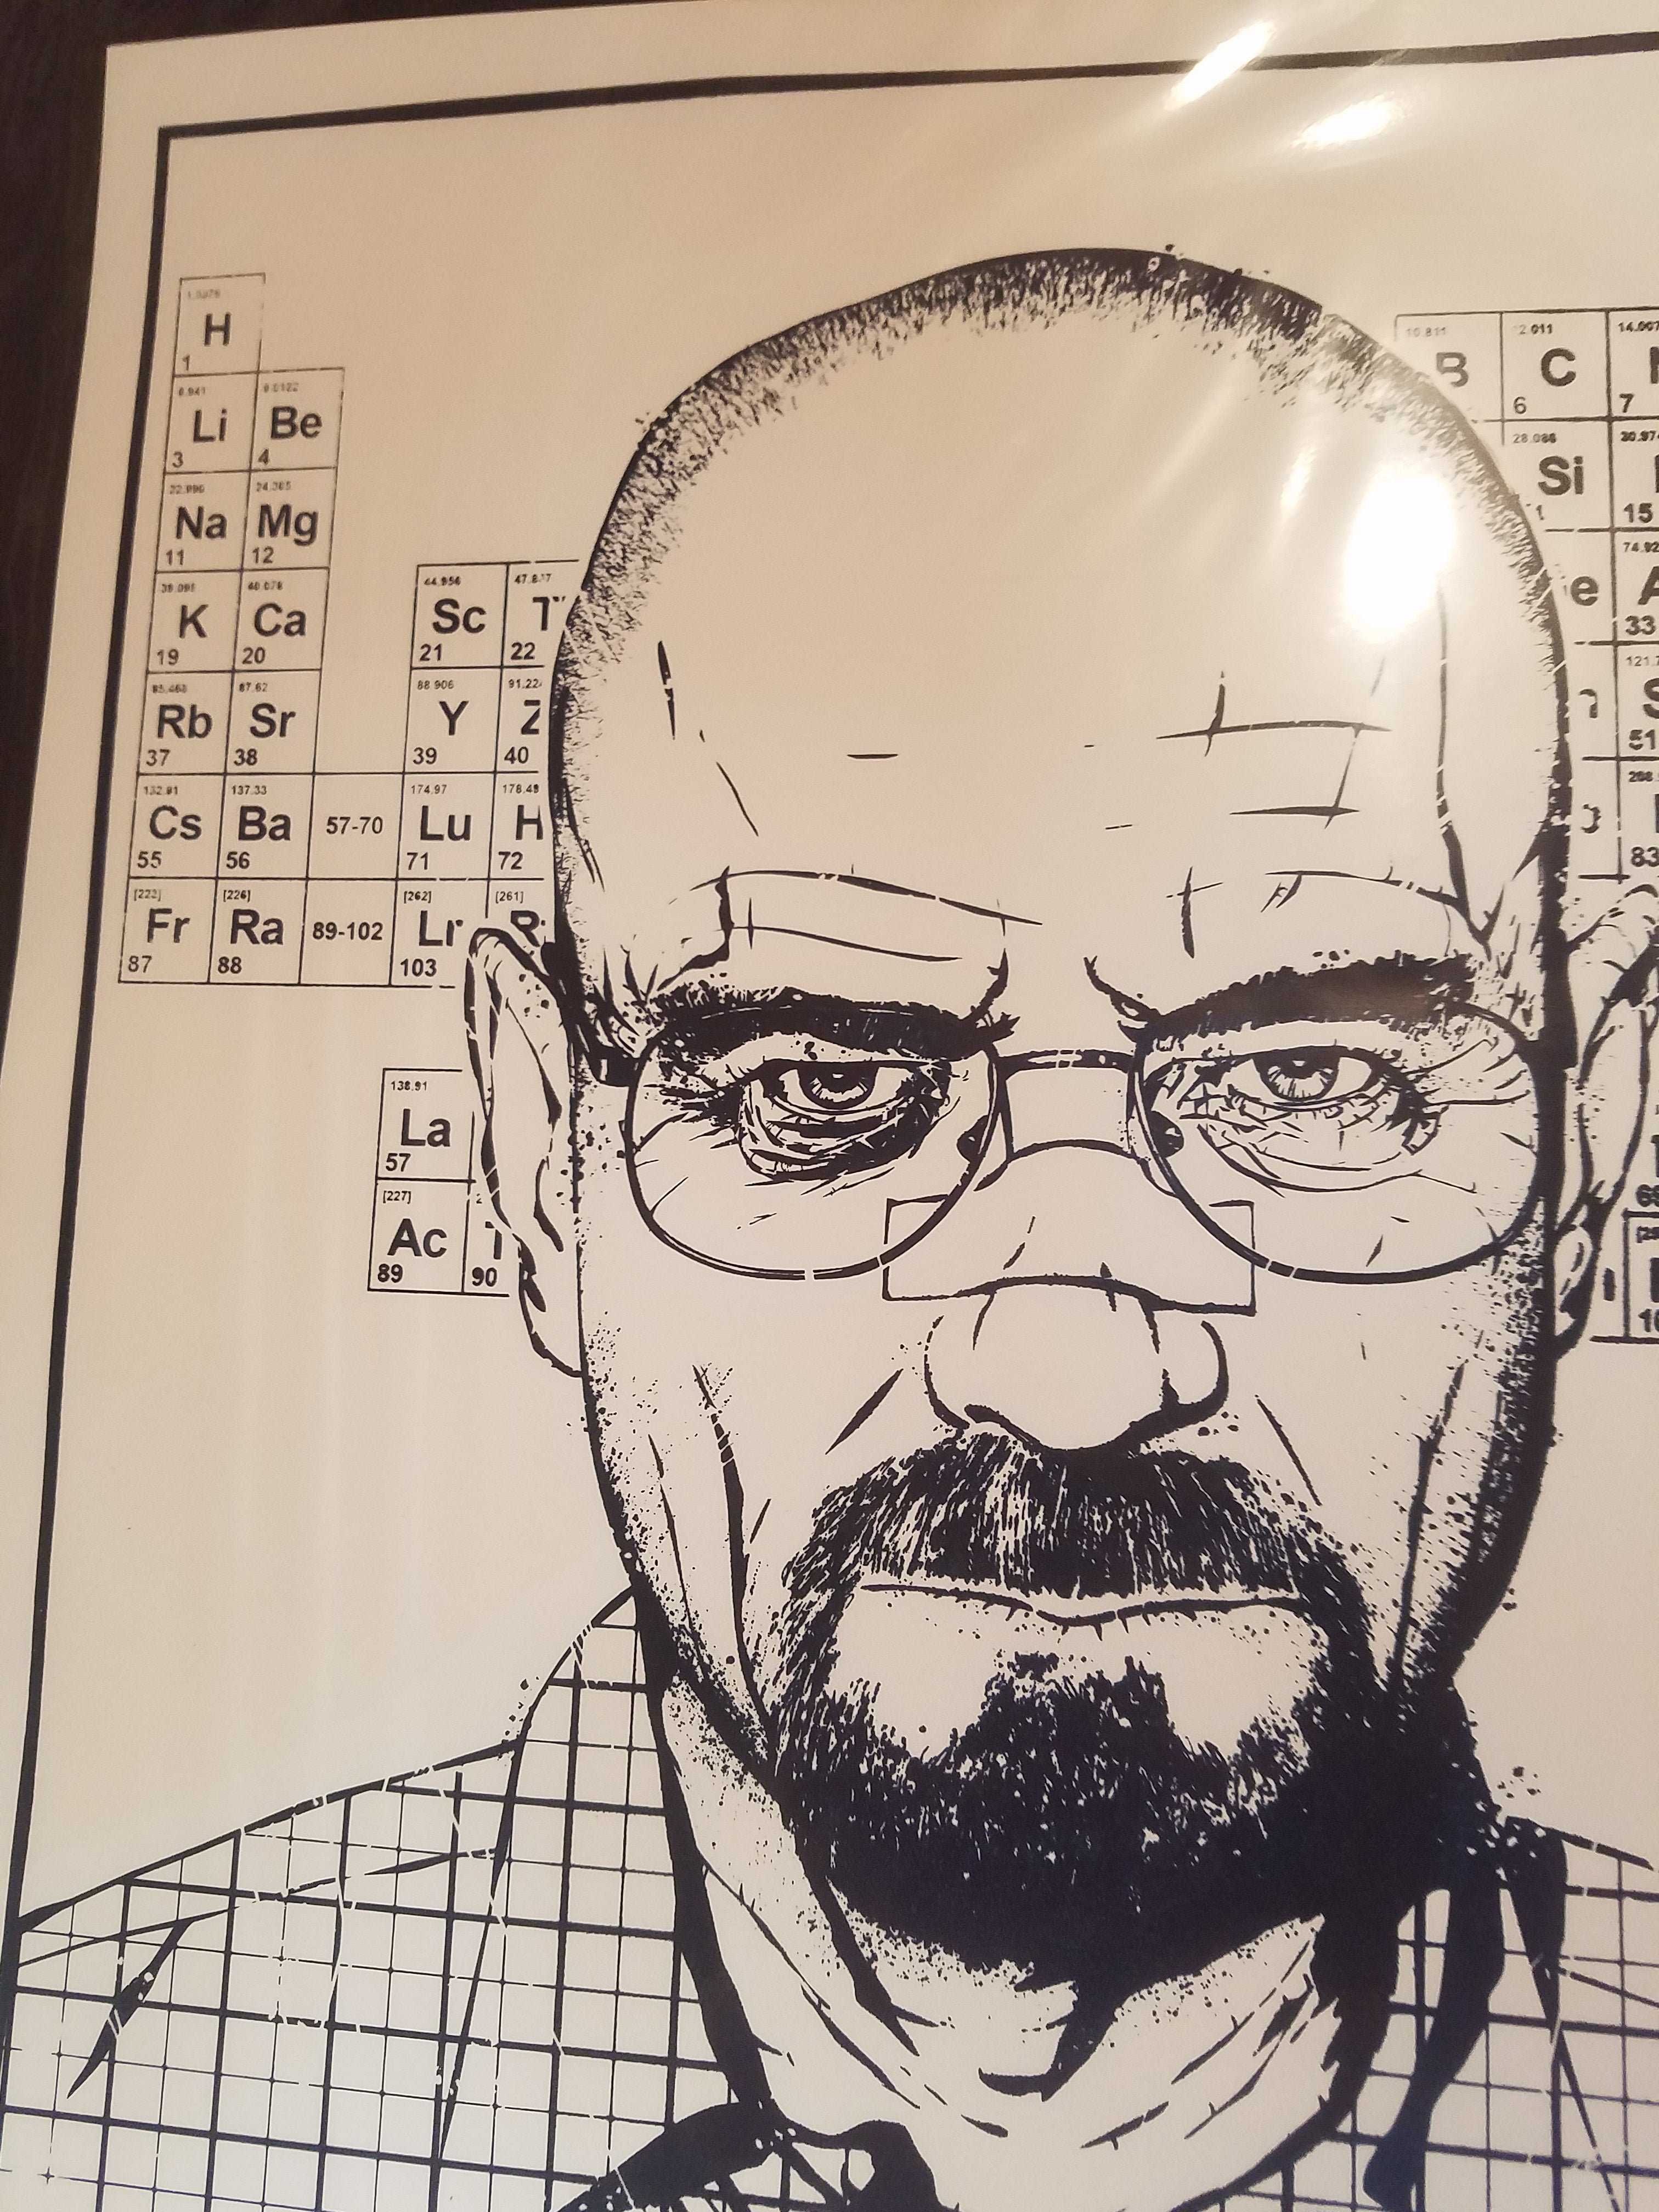 Title: Respect the Chemistry 2013, Blue Sky Variant Artist: Timothy Anderson Edition: xx/65 Type: Screen print. Size: 16" x 12" Notes: For the hit TV series 'Breaking Bad' on AMC Channel, this poster's blue is reflected under glow in the dark lighting. Walter White half Heisenberg. Signed and numbered by the artist. For the hit TV series 'Breaking Bad' on AMC Channel, Walter White half Heisenberg. Print is stored flat in very good condition.